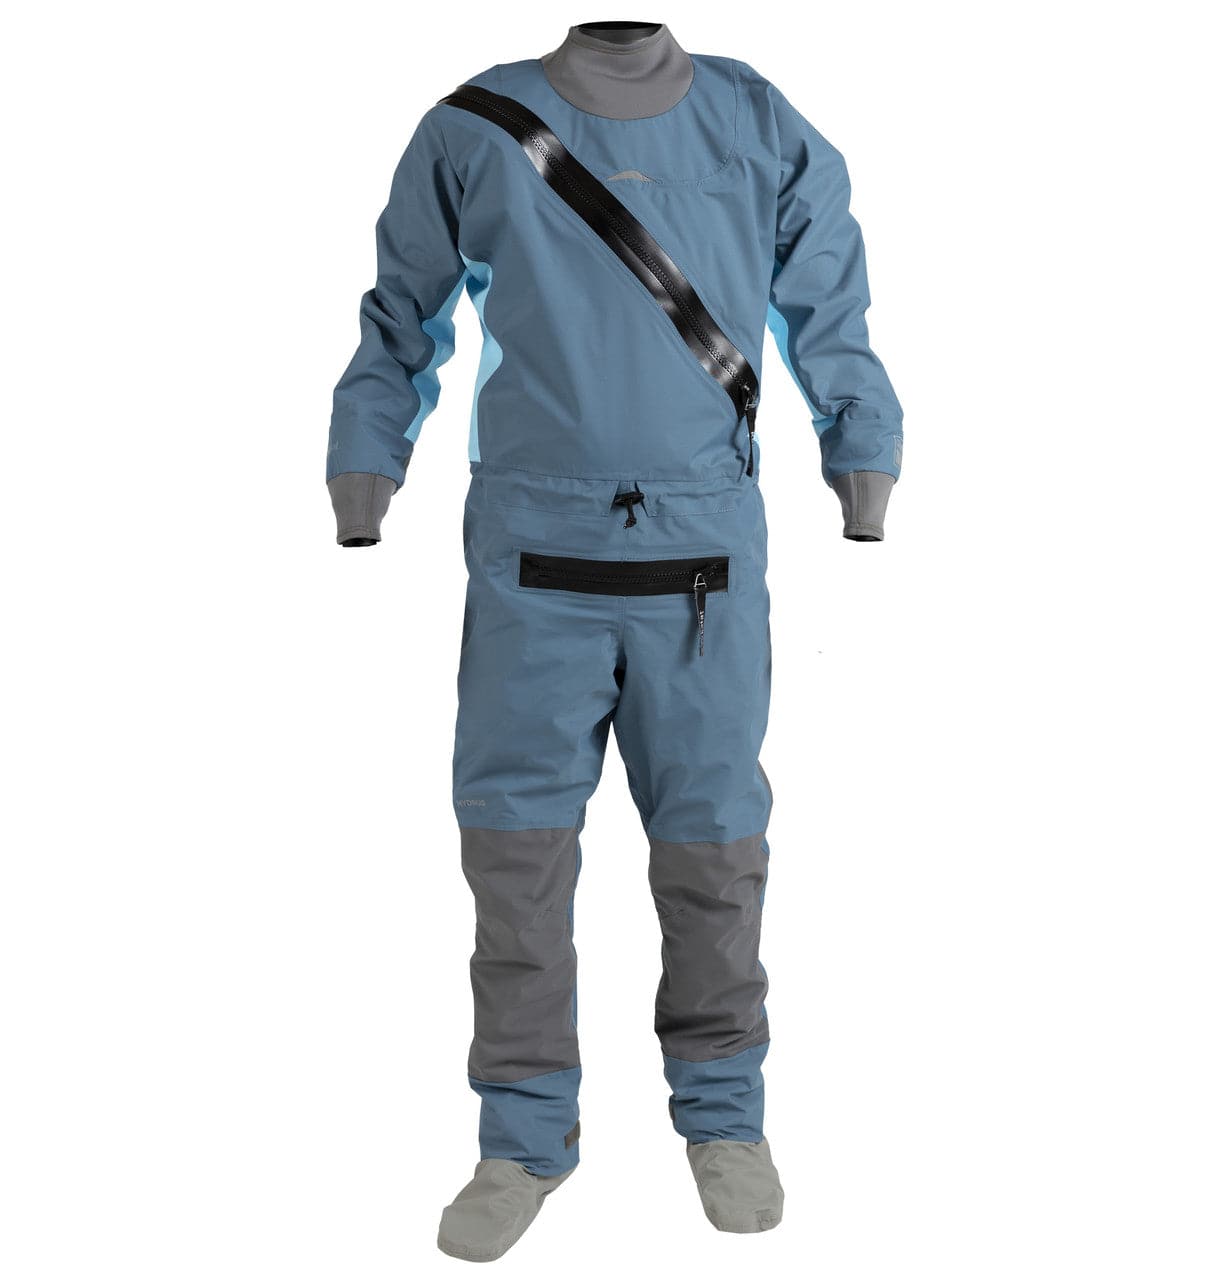 Featuring the Swift Entry Drysuit (Hydrus 3.0) with Relief Zipper men's dry wear manufactured by Kokatat shown here from one angle.